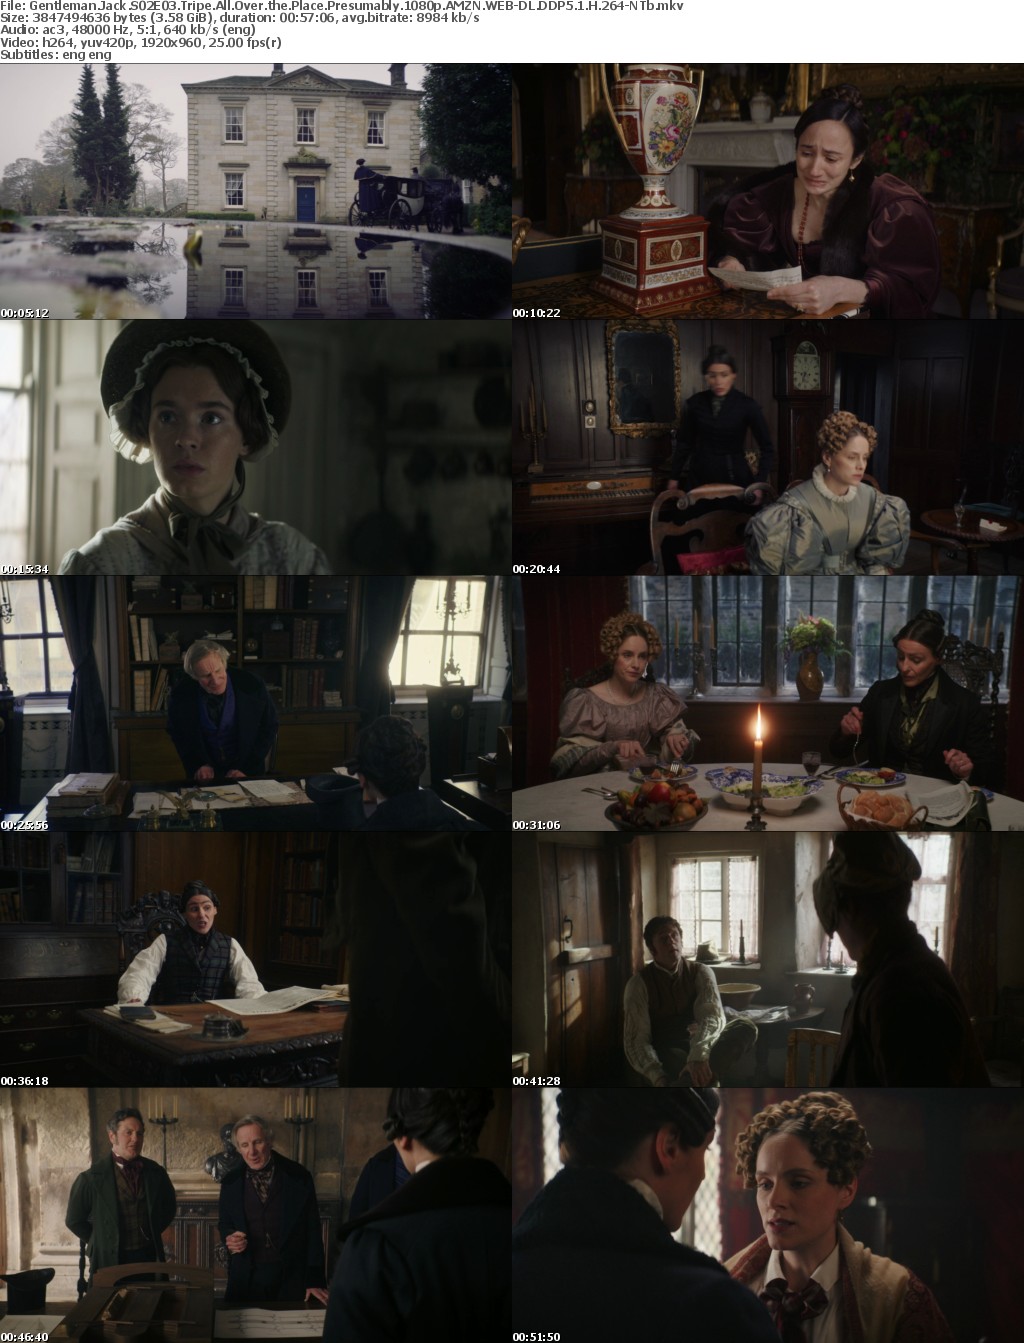 Gentleman Jack S02E03 Tripe All Over the Place Presumably 1080p AMZN WEBRip DDP5 1 x264-NTb